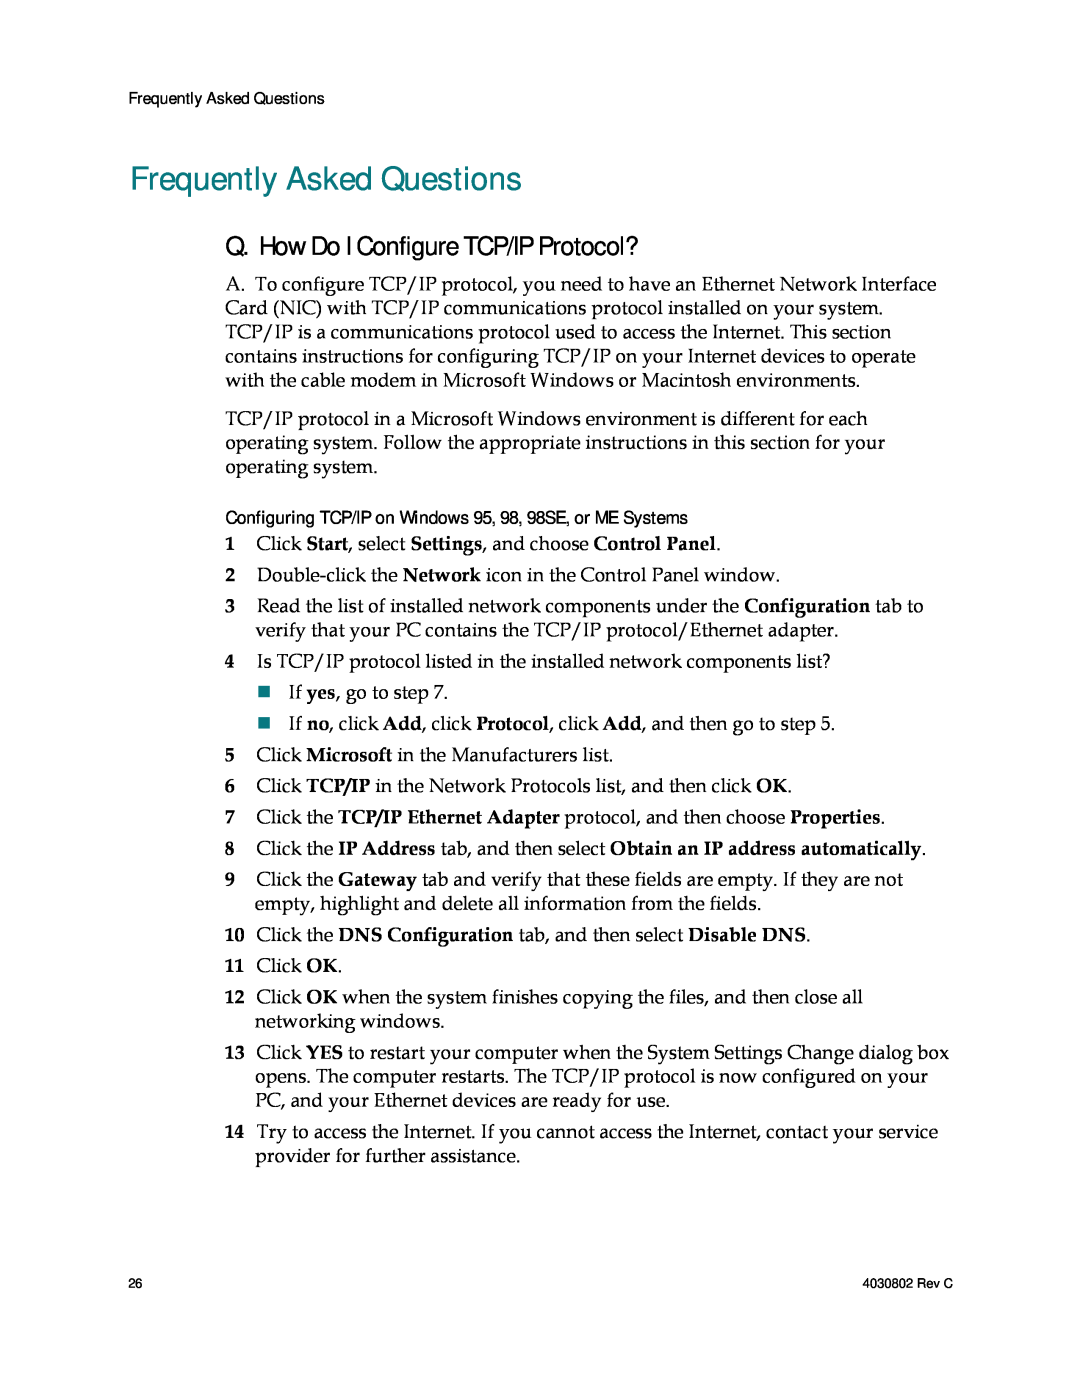 Cisco Systems 4027668, AAC400210112234 Frequently Asked Questions, Q. How Do I Configure TCP/IP Protocol? 